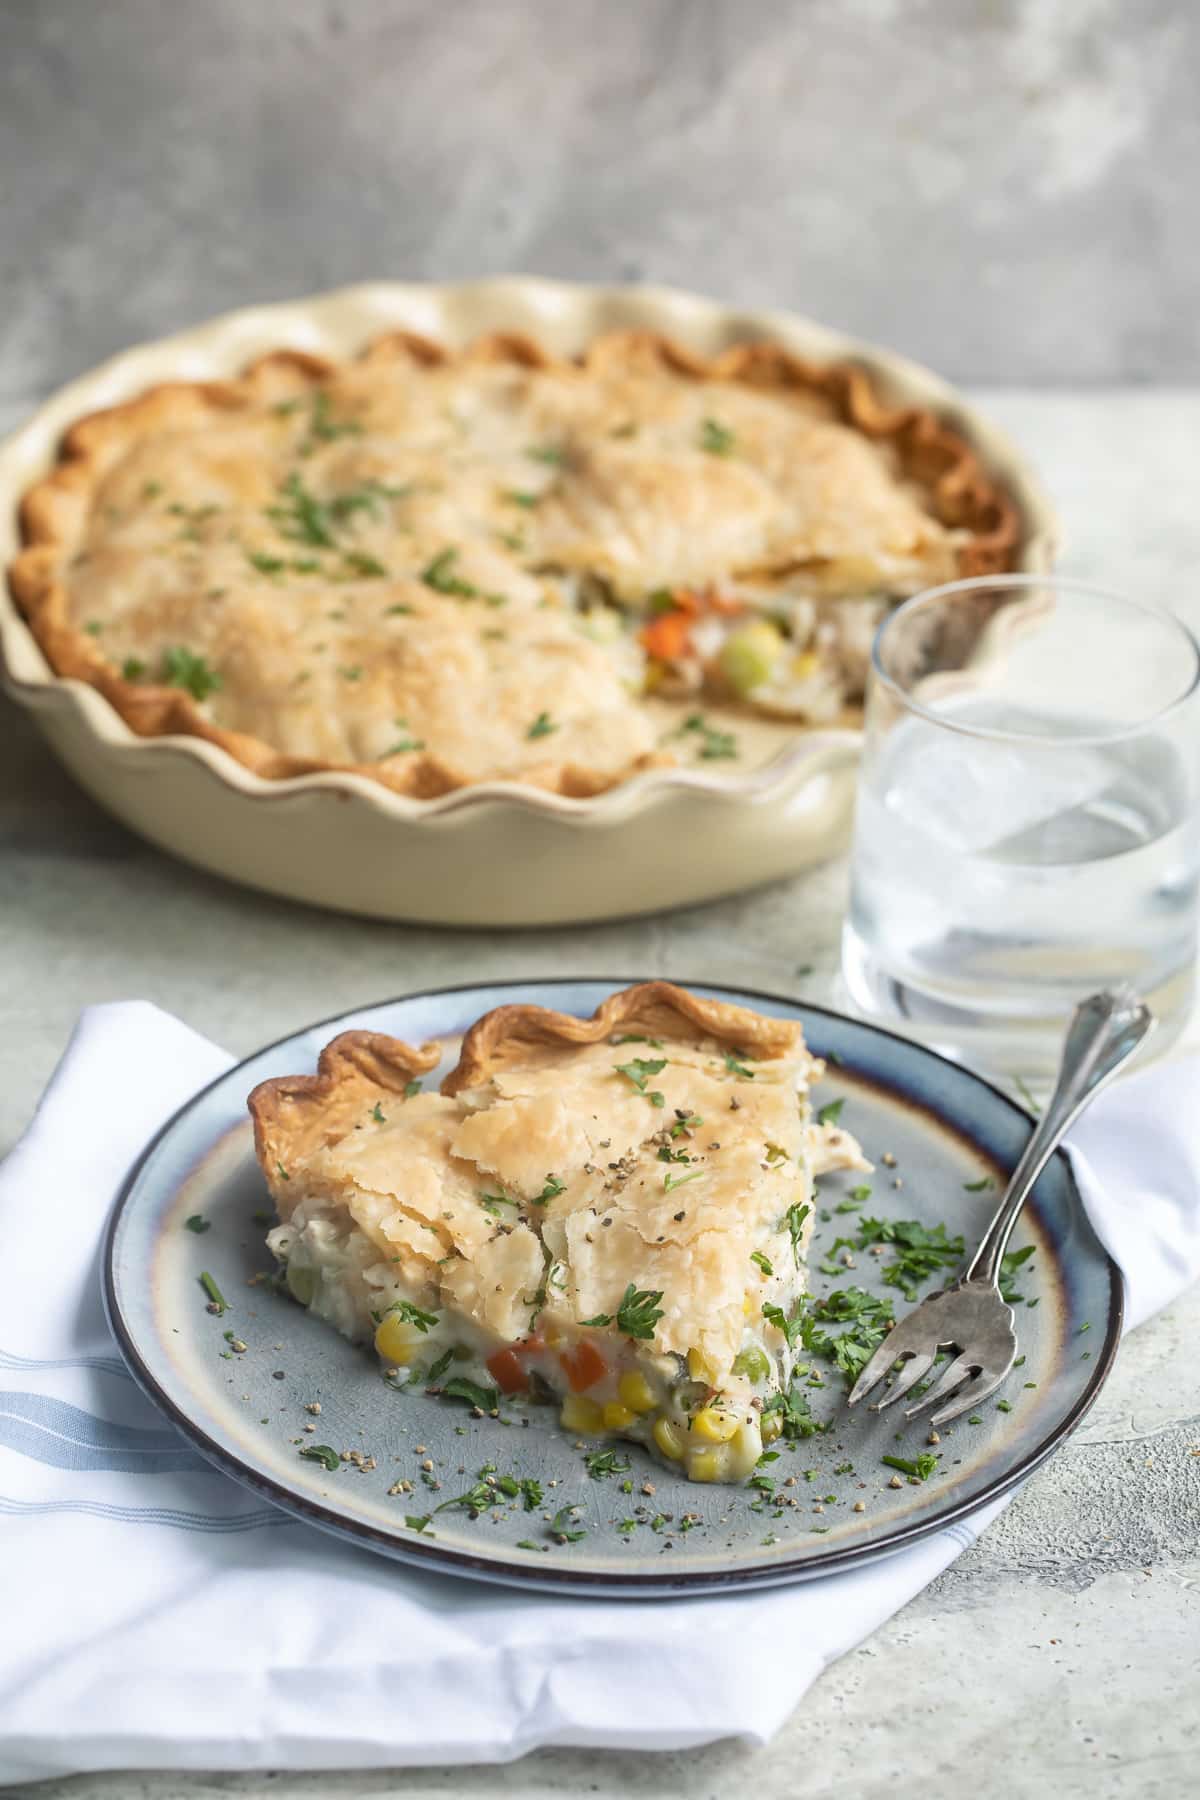 Turkey pot pie with a slice taken out and set on a plate.